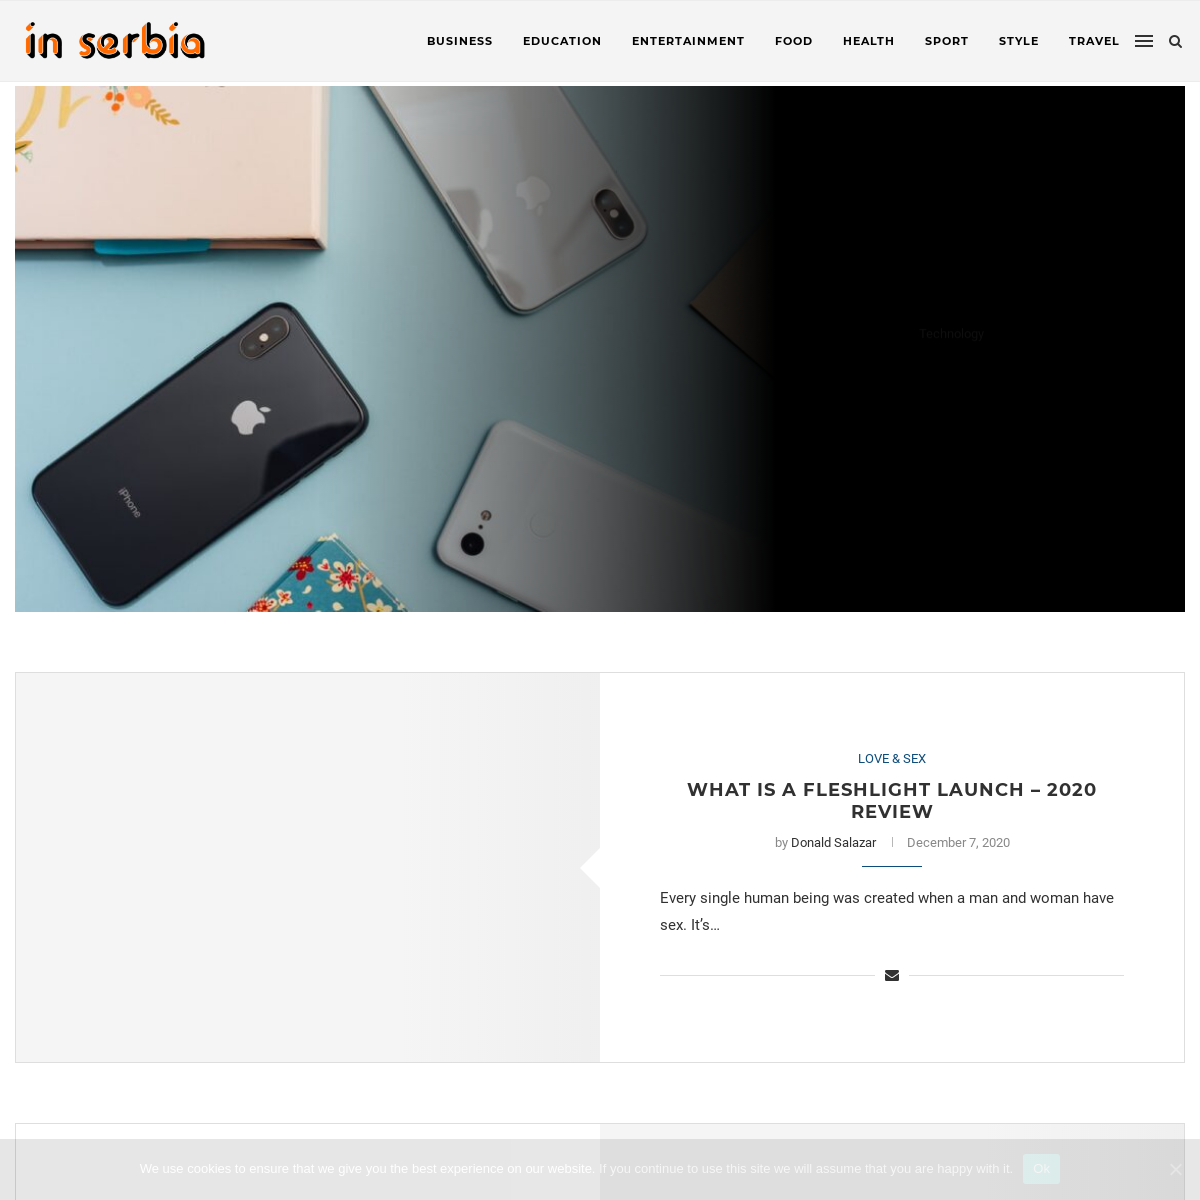 InSerbia News - Latest News from Serbia, Balkans, Europe and World